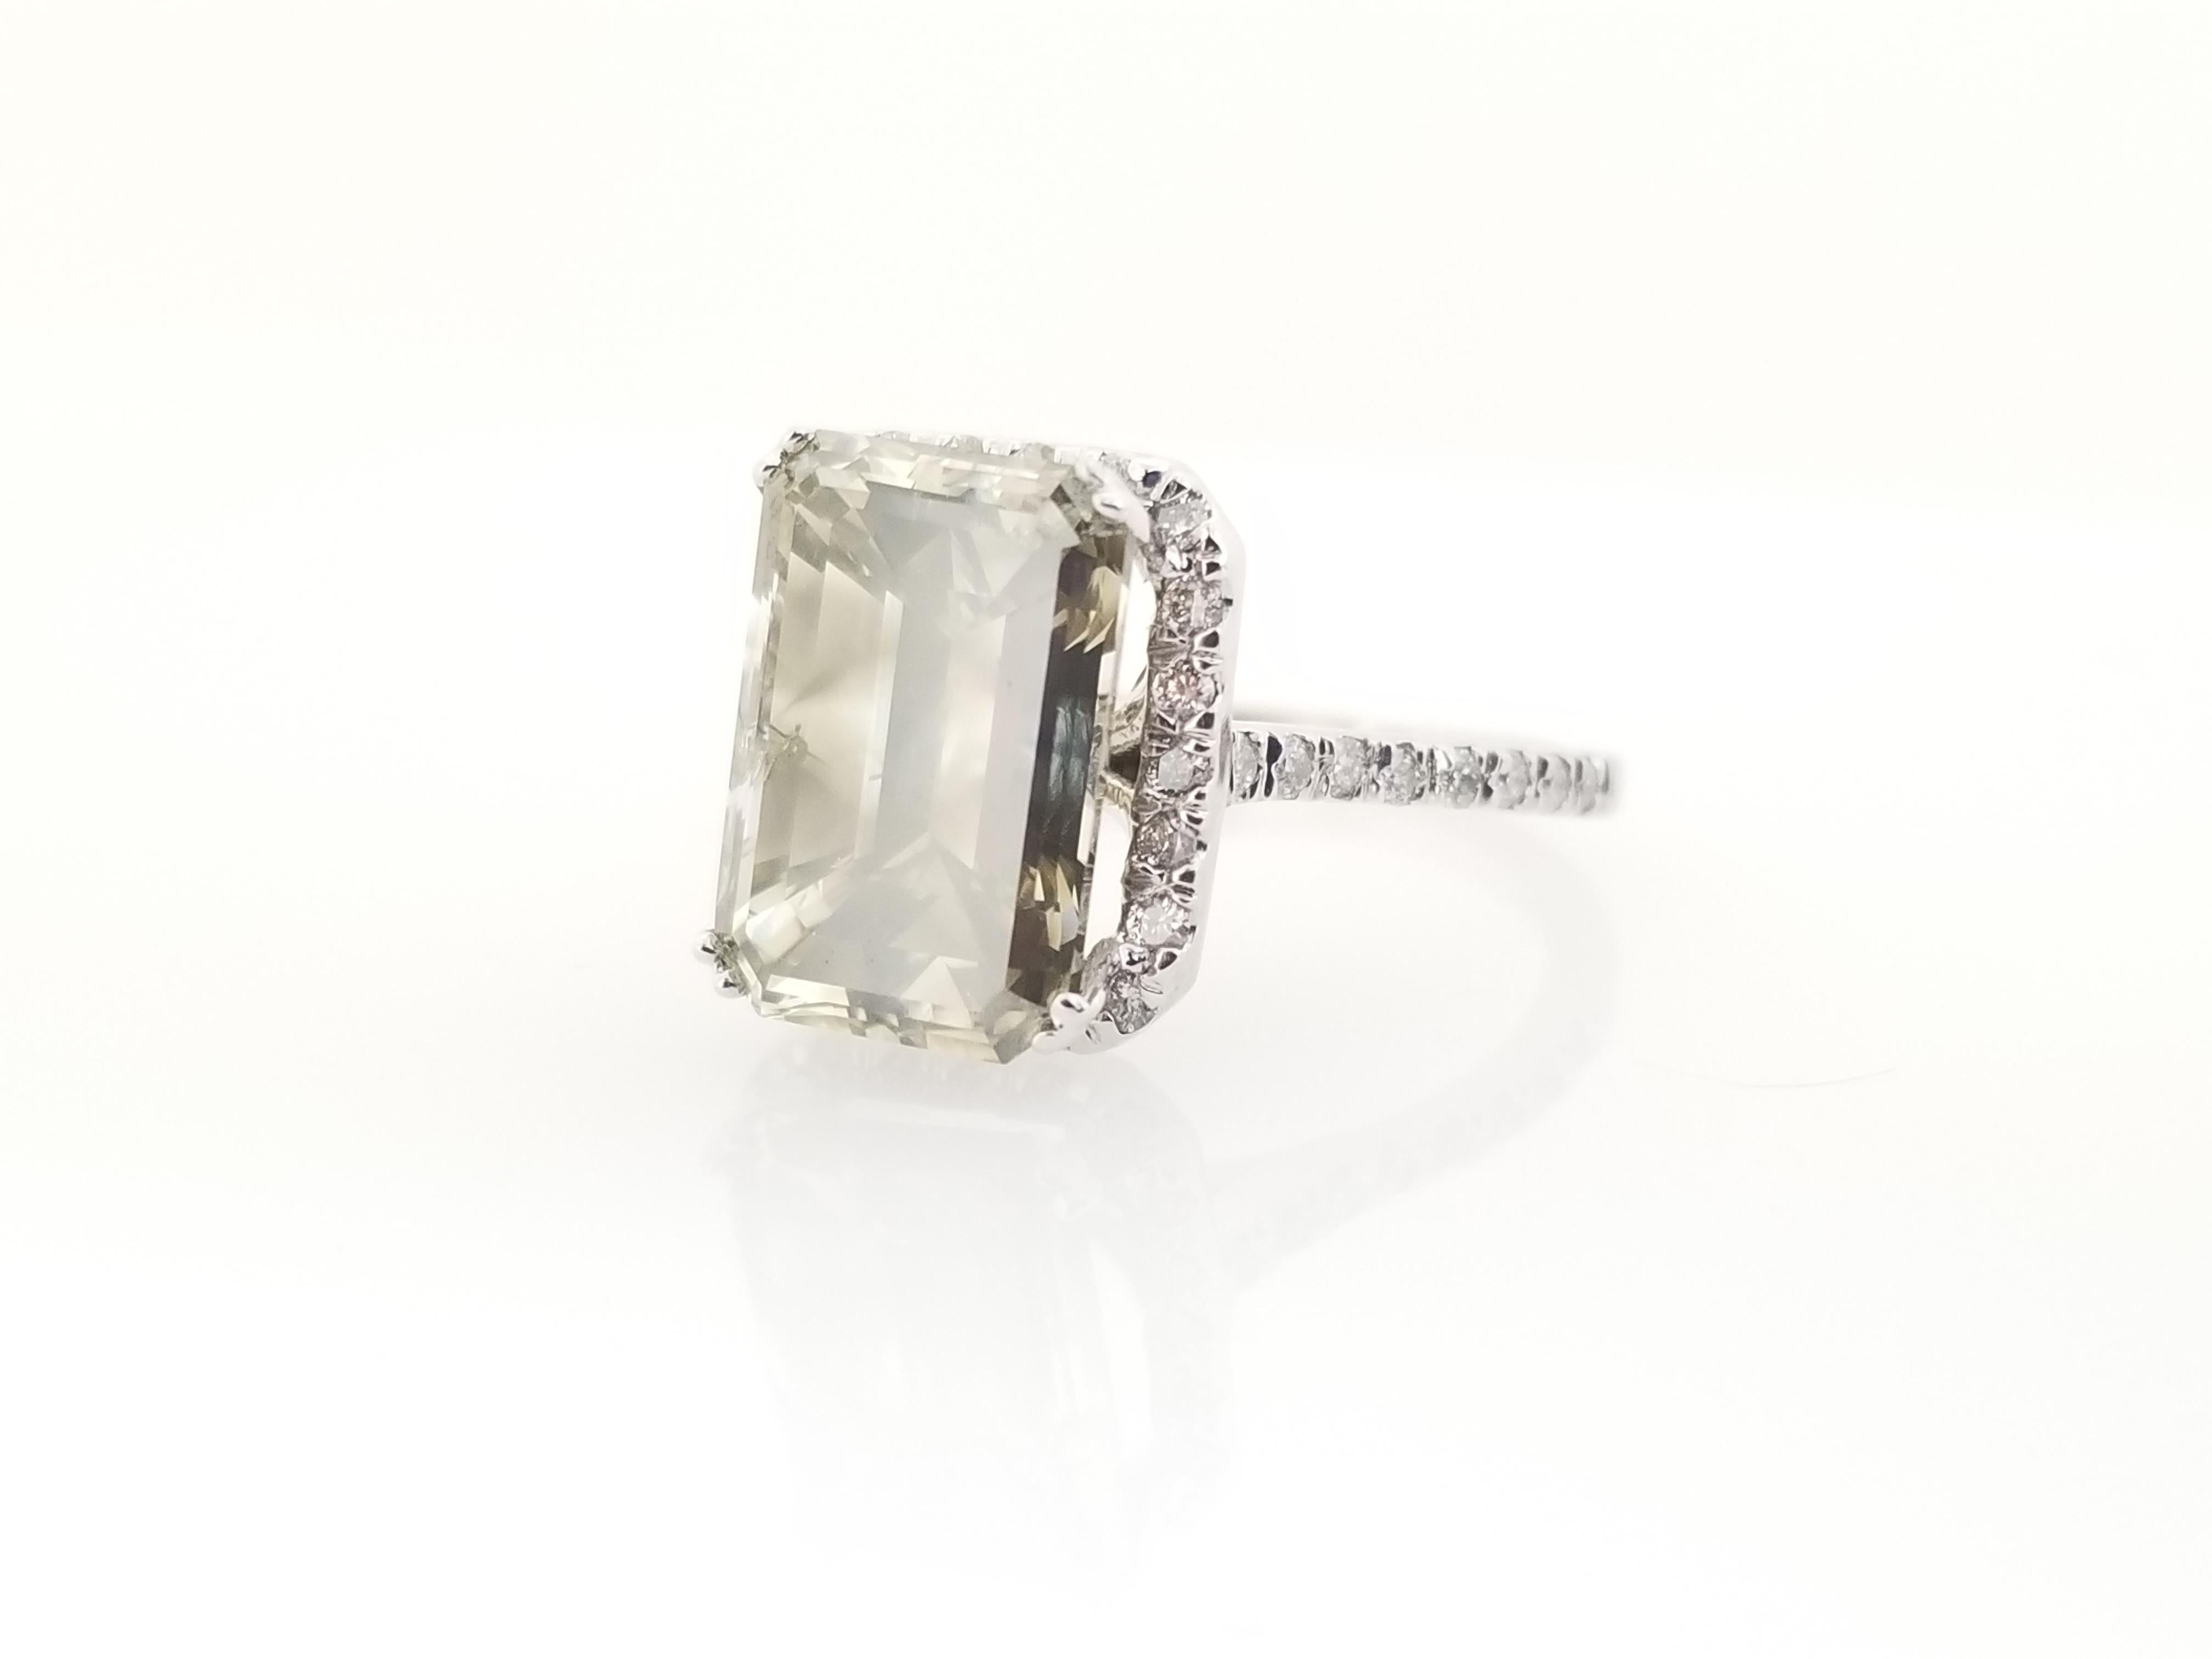 All Natural Fancy Color Gray Emerald Cut Diamond Ring Weighing 5.51 carats by IGI . Elegance for every occasion.
IGI # GT12753503
Measurements: 12.12X8.23X6.29mm
Center Stone Weight: 5.51 cttw
Side Diamonds: 0.45 cttw
Ring Size: 6.5
Fancy Color